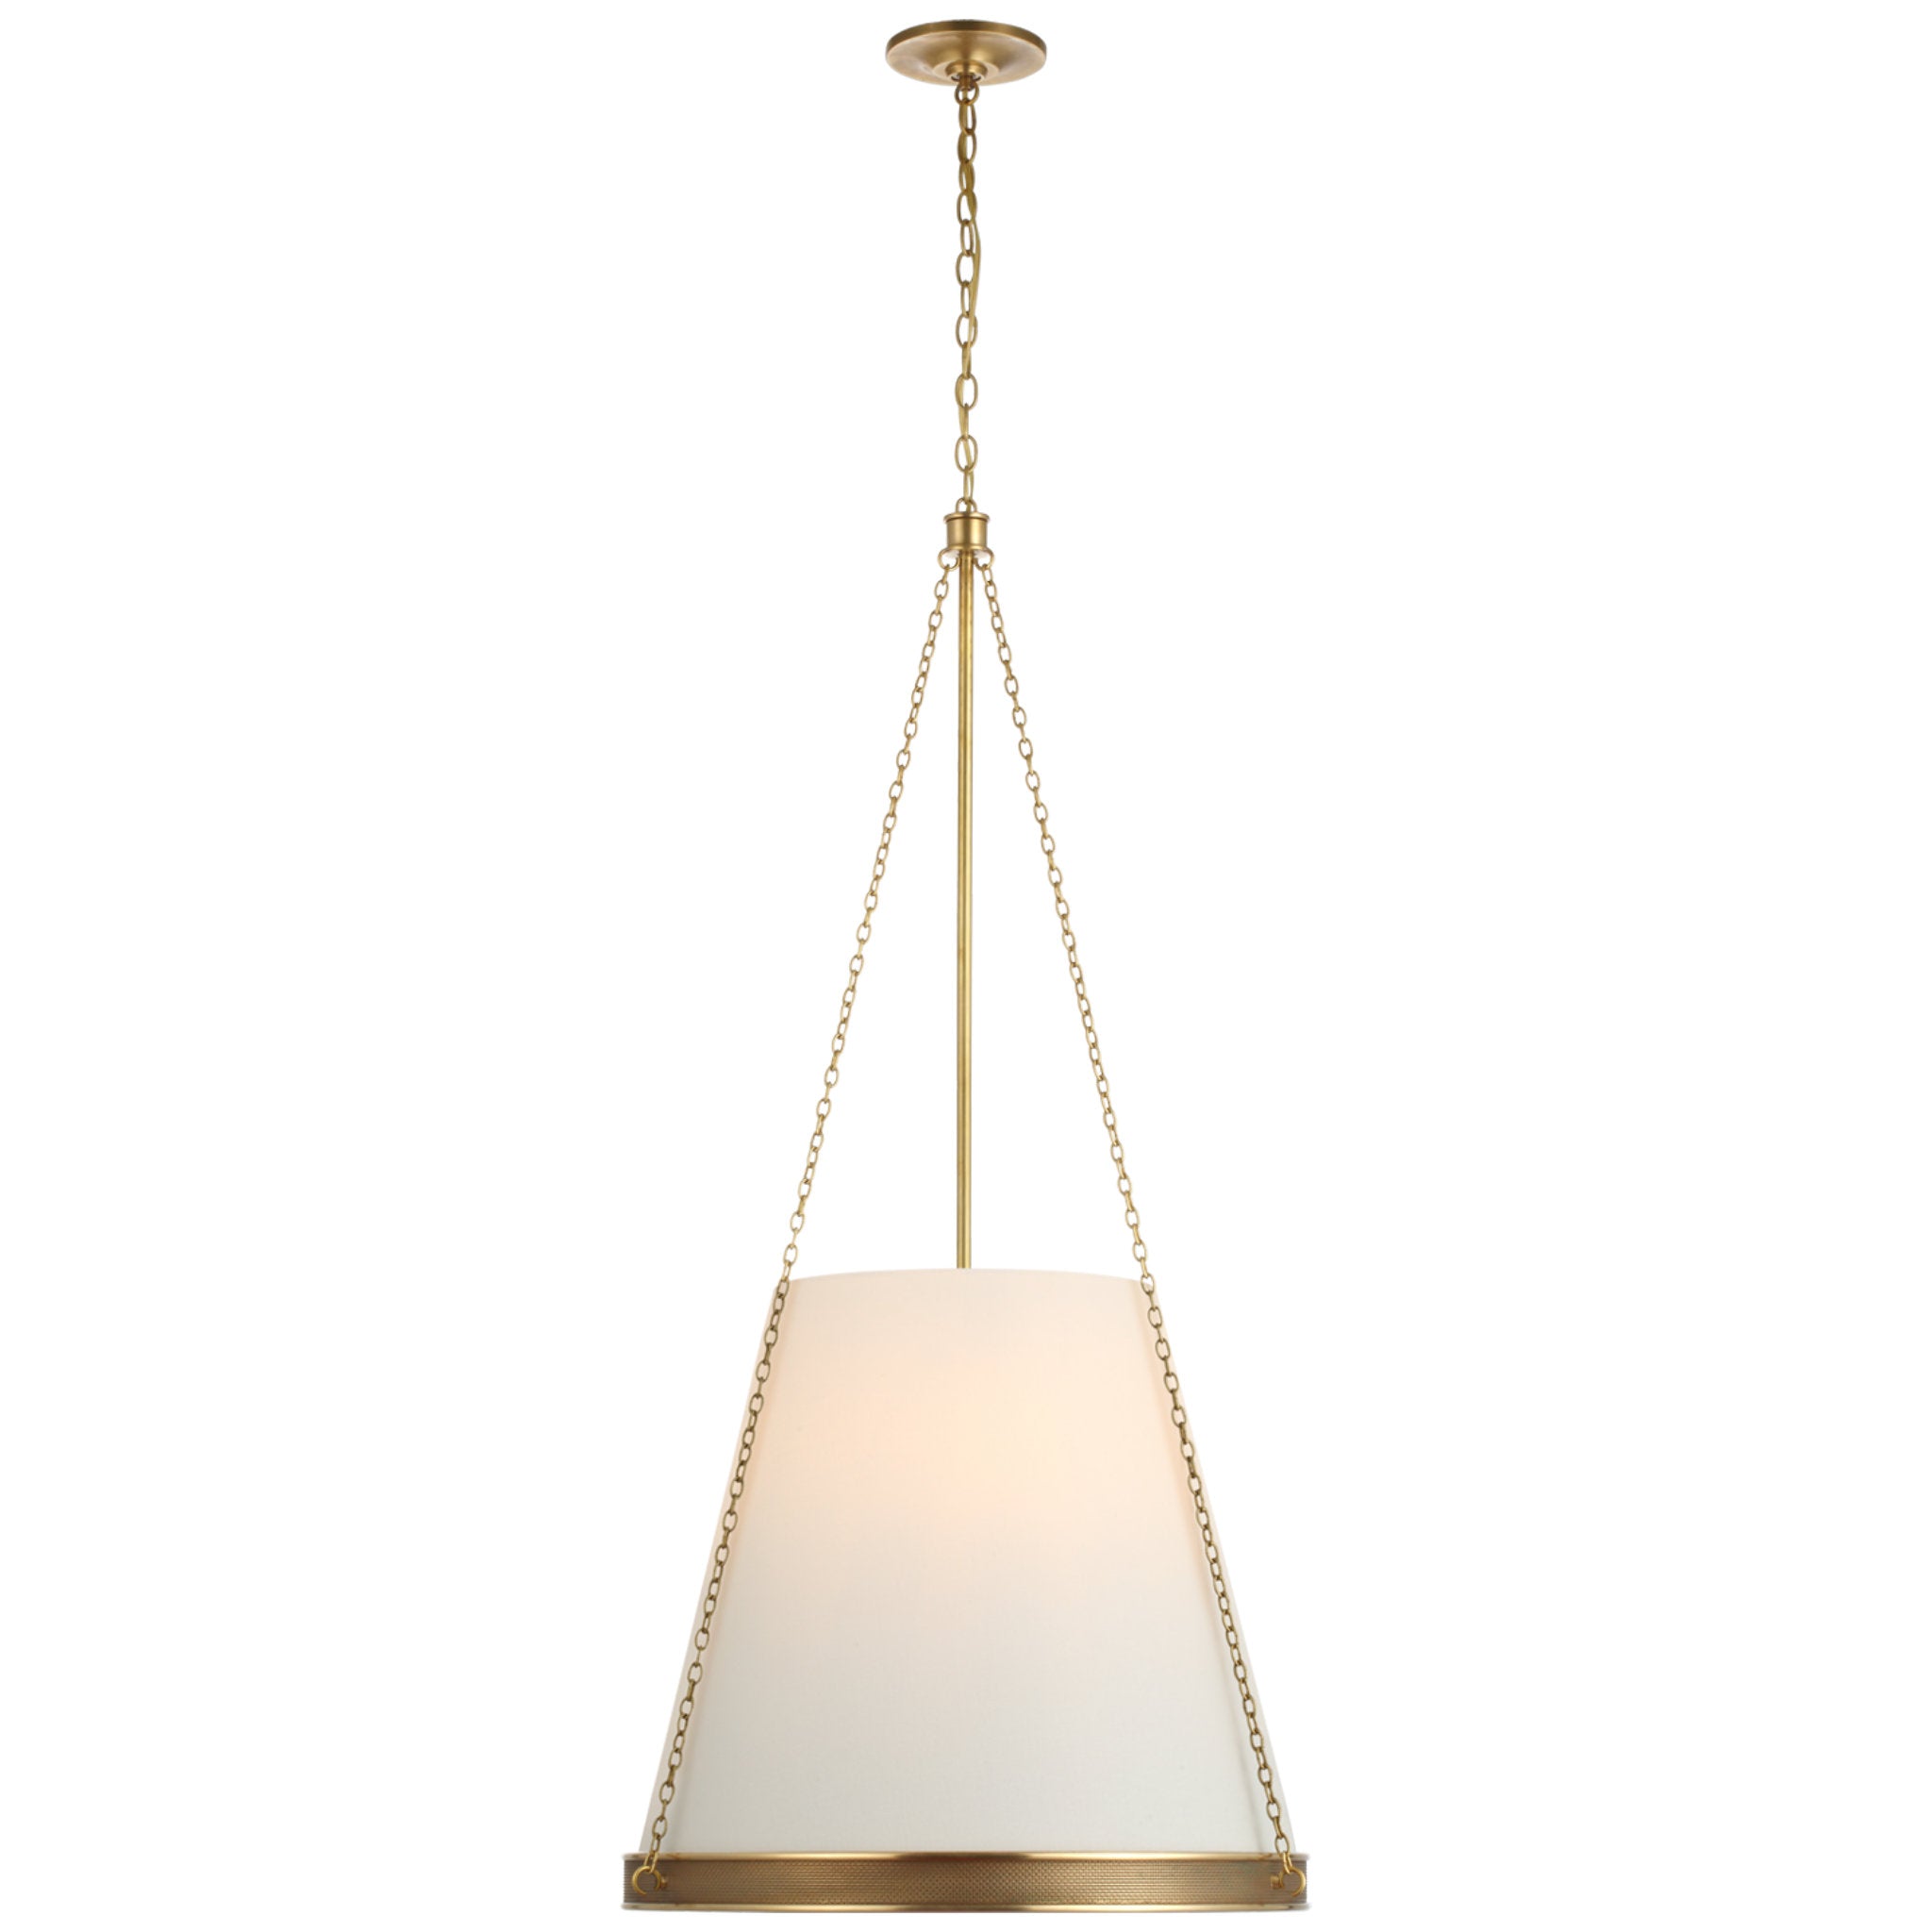 Marie Flanigan Reese 22" Pendant in Soft Brass with Linen Shade